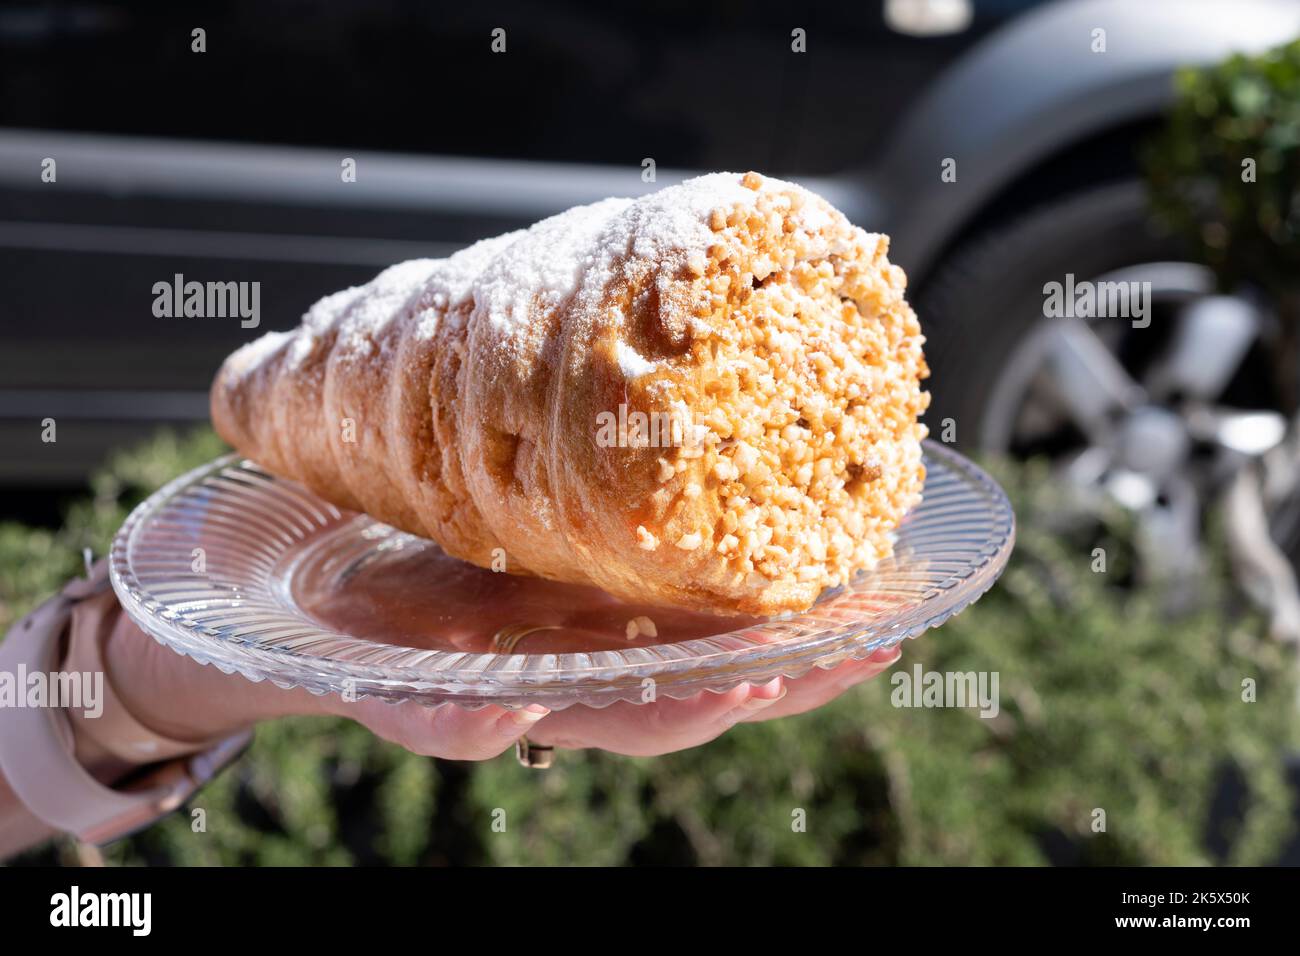 A large, fresh, classic cream horn. The cake, made with puff pastry, and dusted with icing sugar and nuts. The cake has a fresh cream filling. Stock Photo